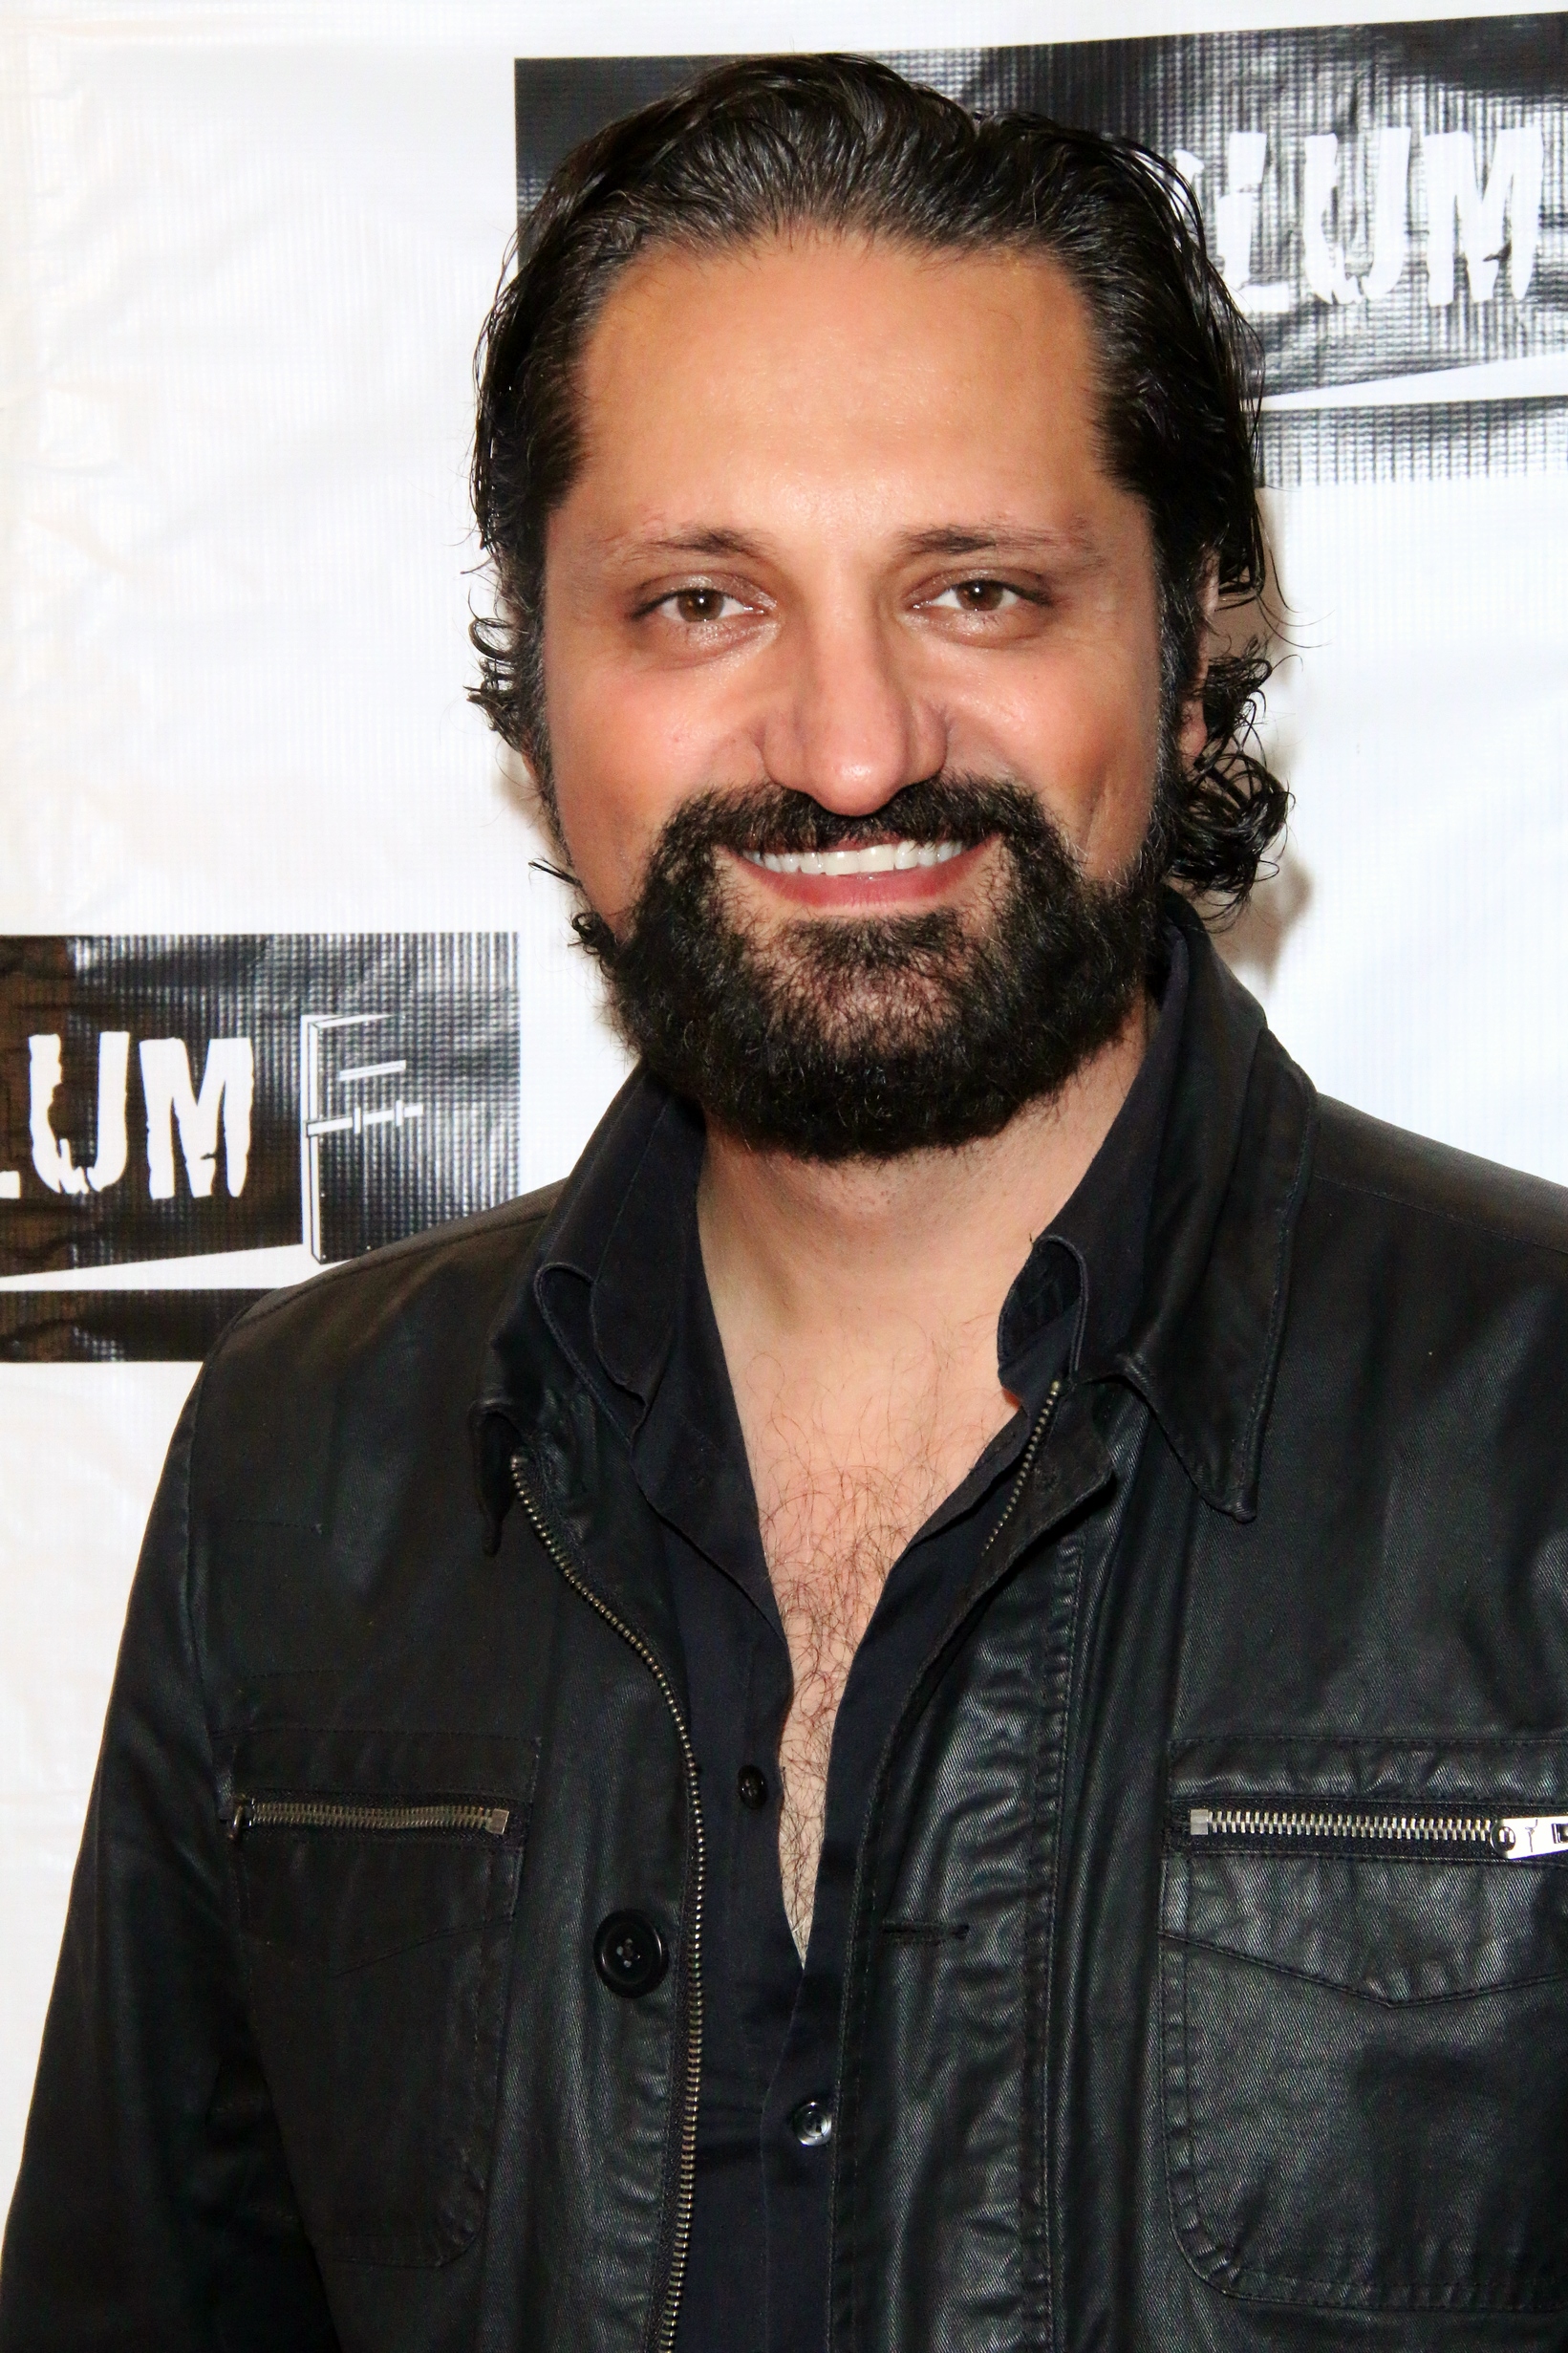 Danny Boushebel attends the 'Bound' Film Premiere in Los Angeles on Jan. 9th, 2015.